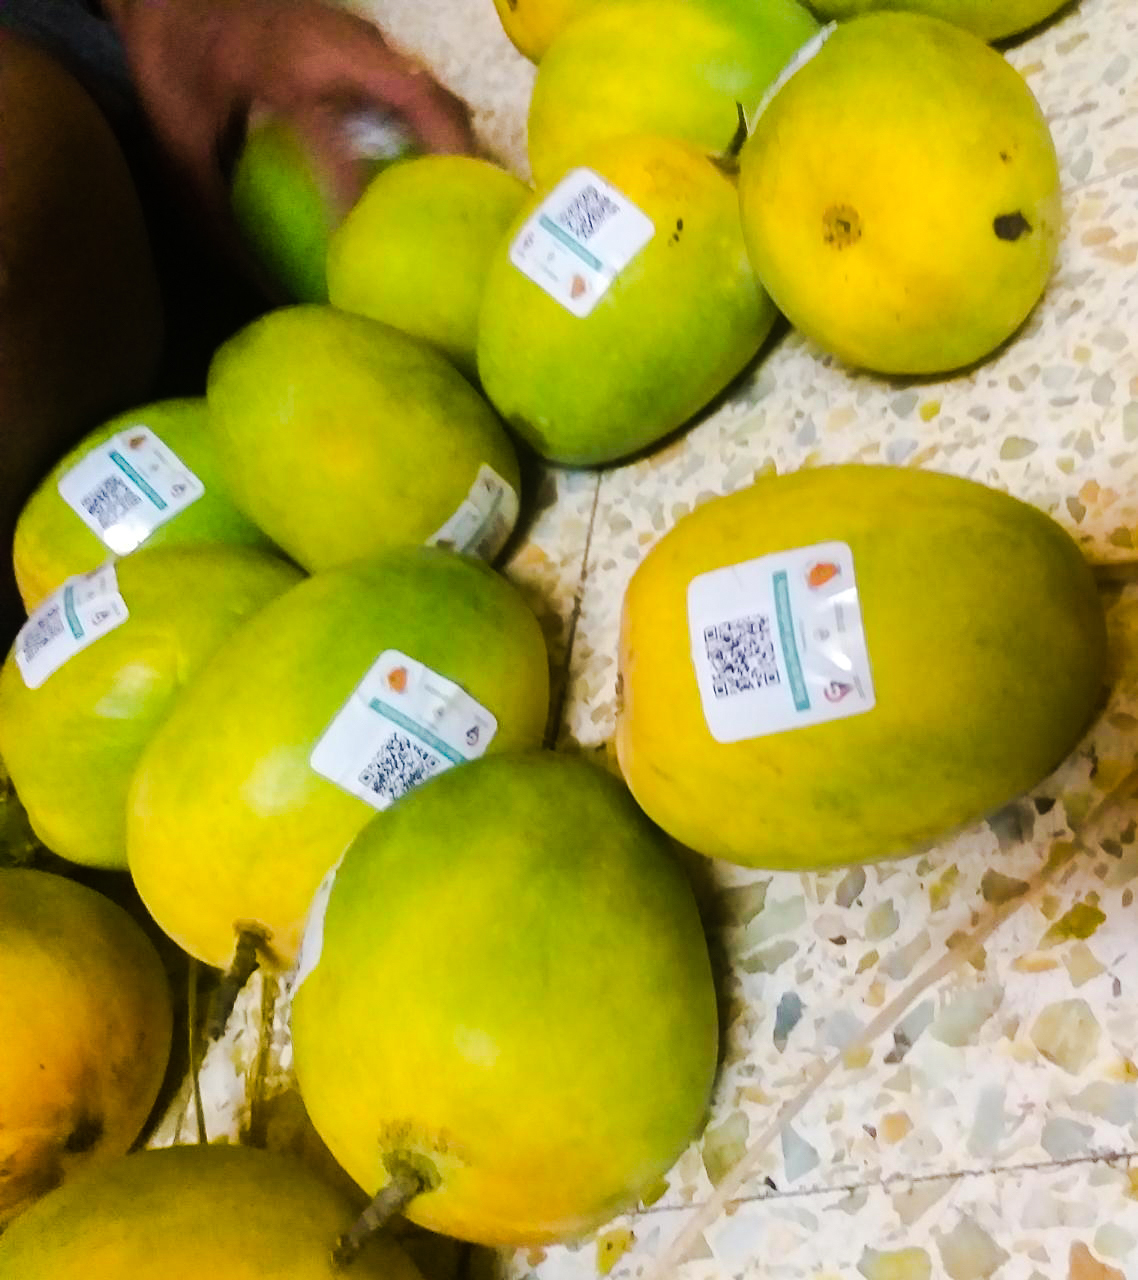 Alphonso mangoes with GI-tags